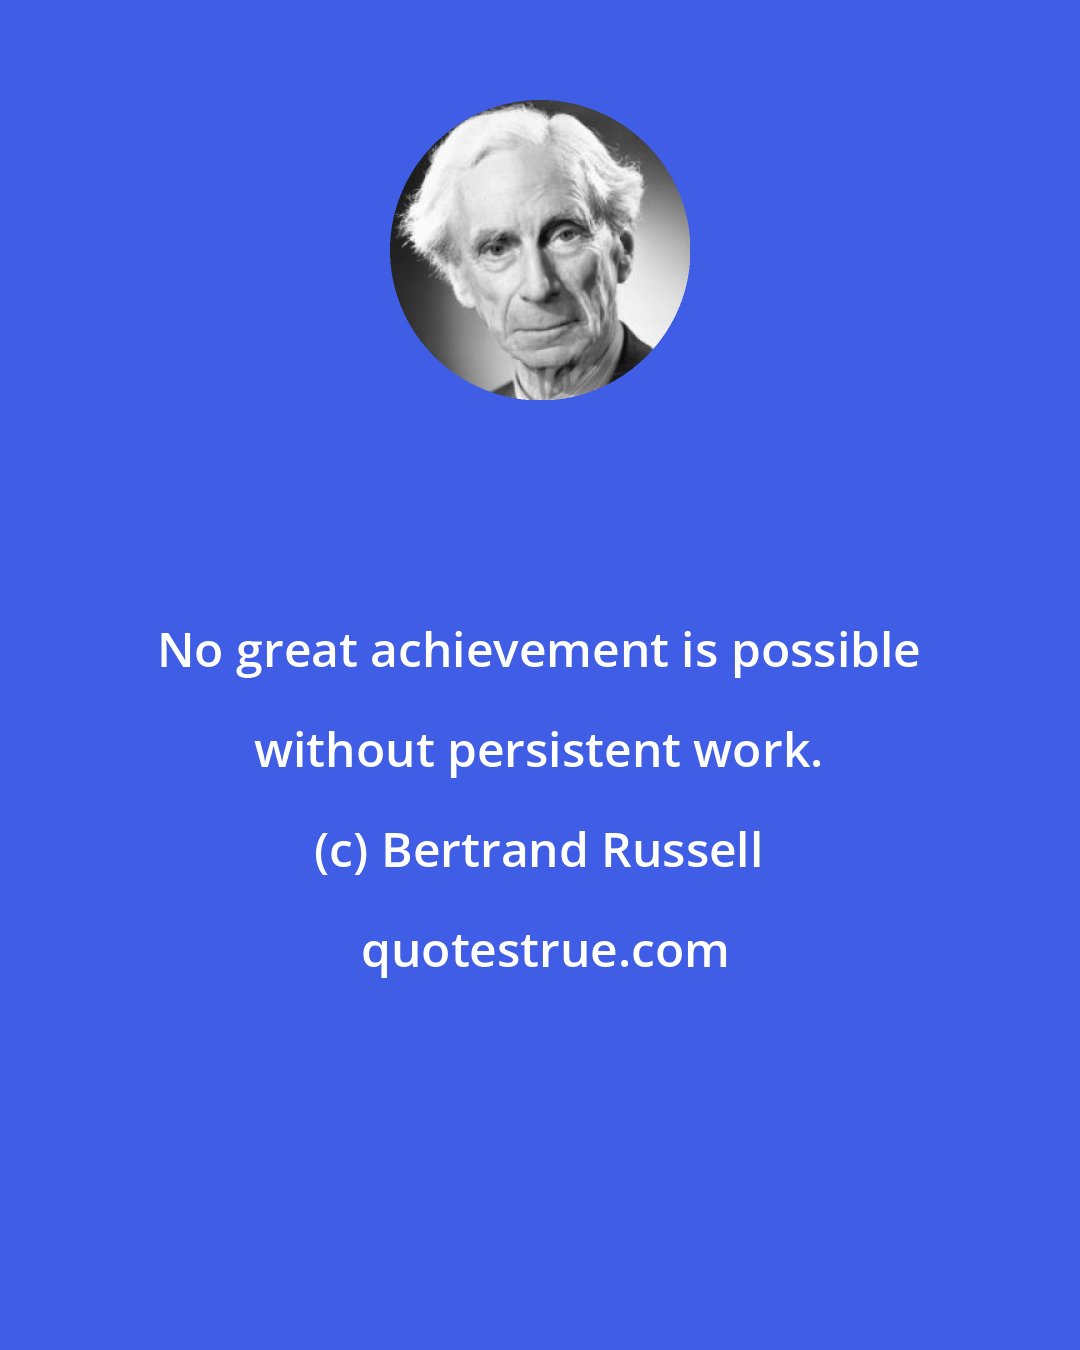 Bertrand Russell: No great achievement is possible without persistent work.